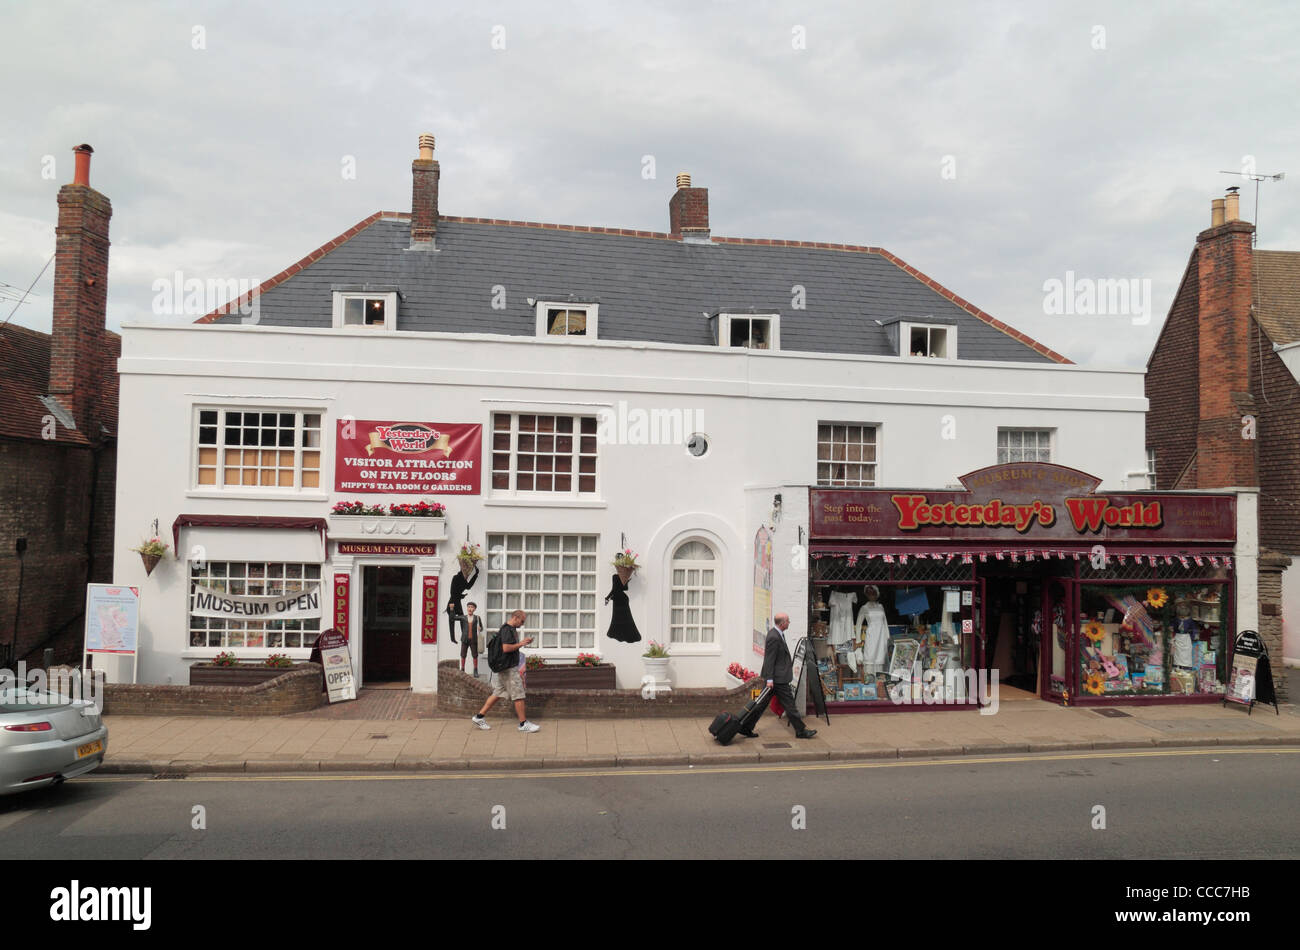 'Yesterday's World' museum and shop on High Street, Battle, East Sussex, UK. Stock Photo